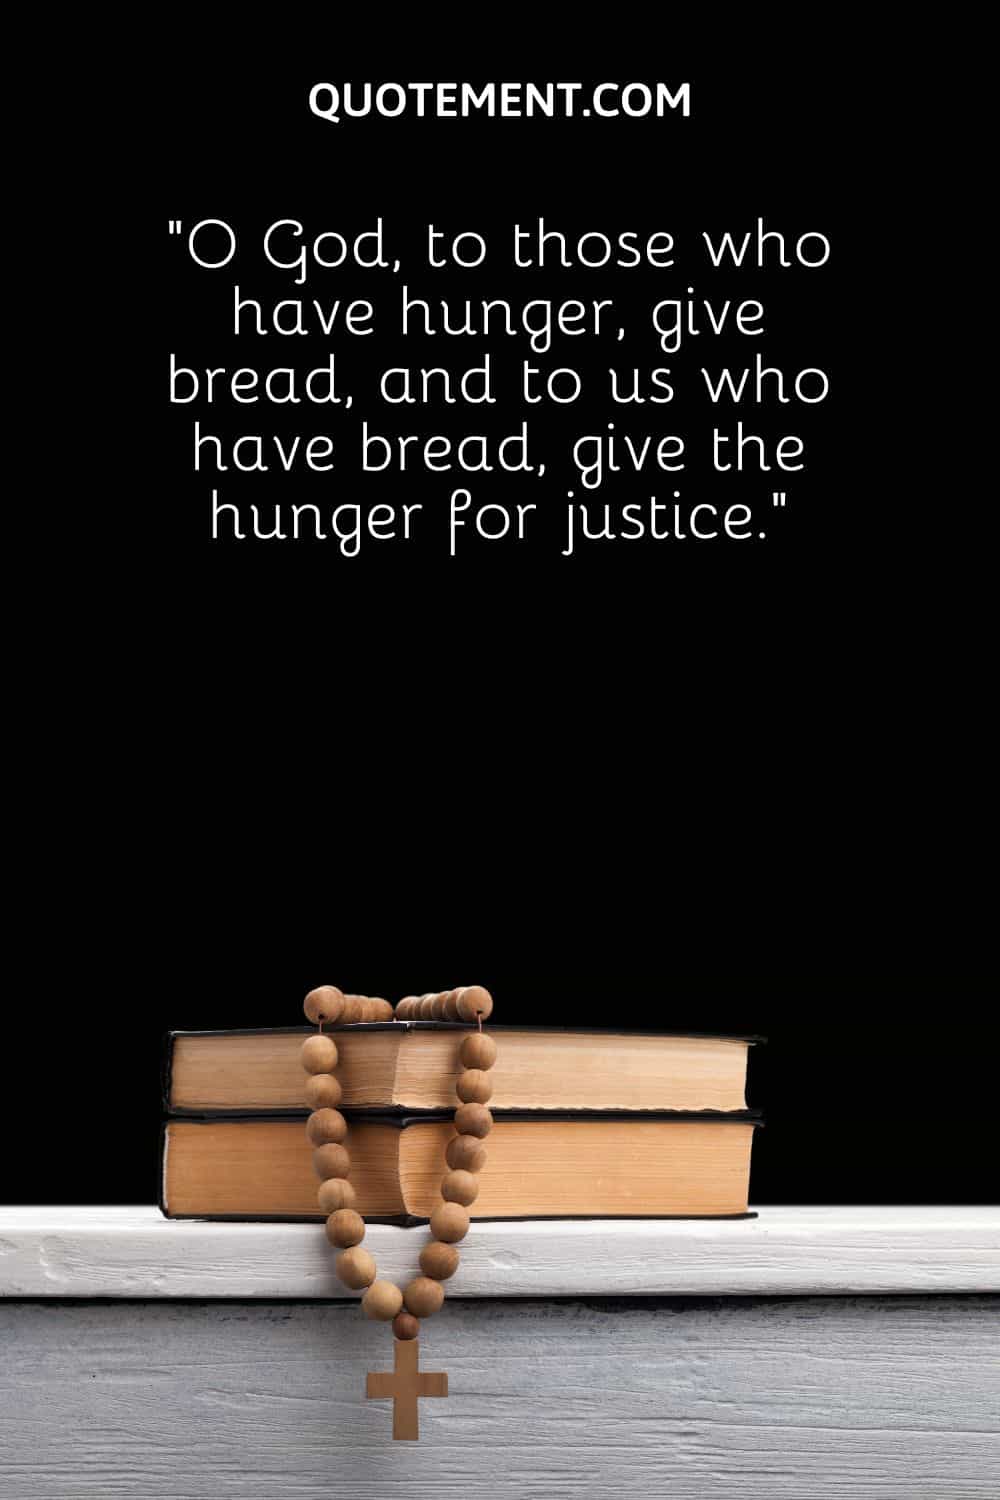 those who have hunger, give bread,